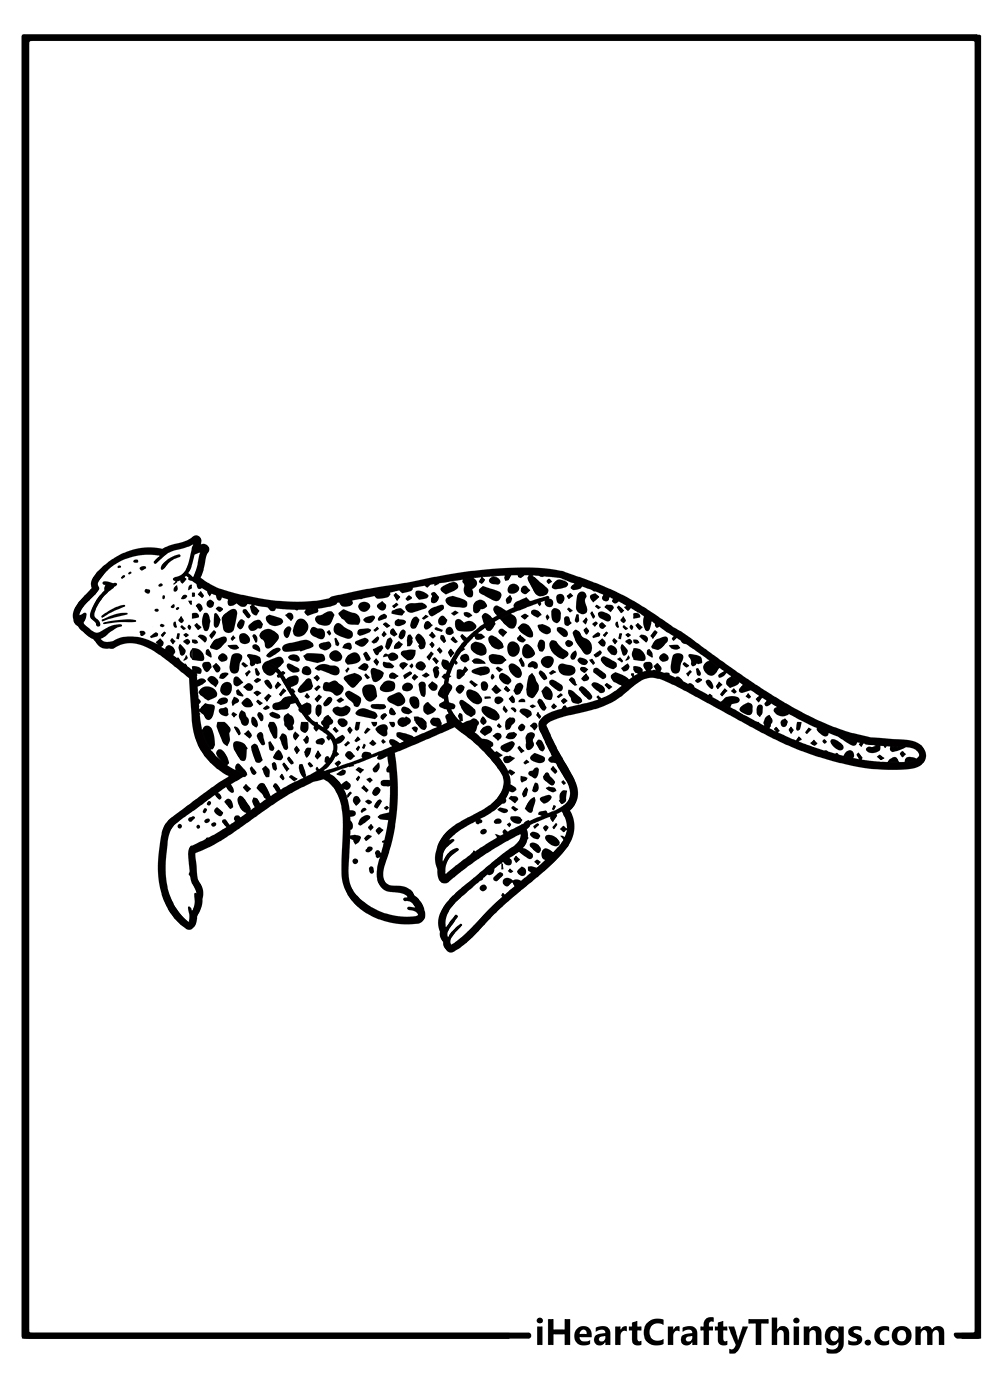 Cheetah Coloring book for adults free print out